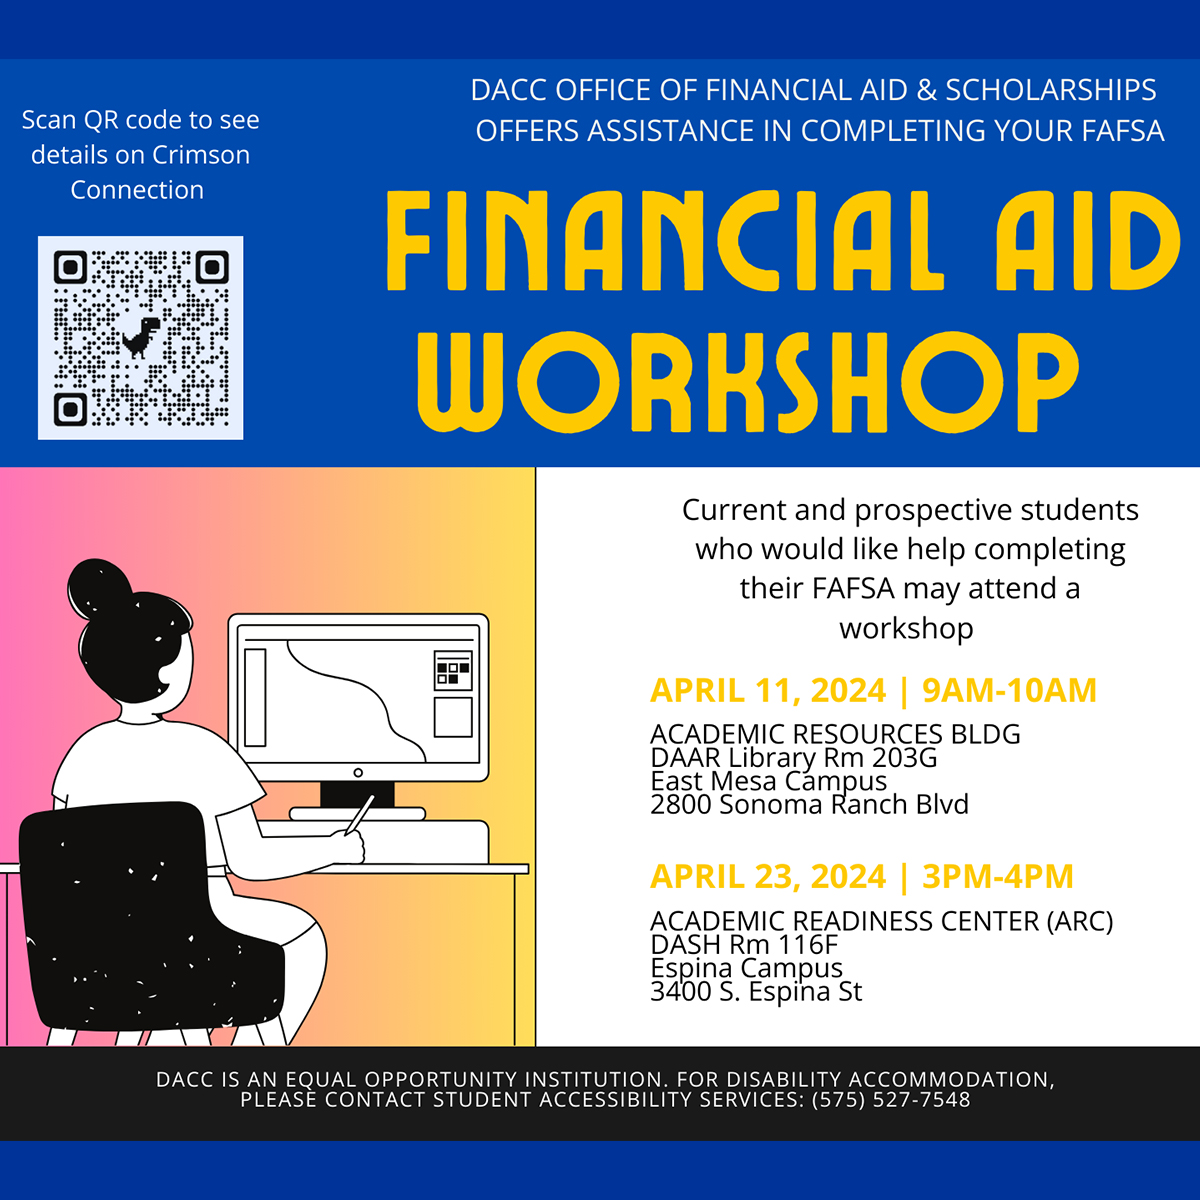 Join us at DACC East Mesa Campus (Academic Resources Bldg.) for a Financial Aid Workshop on Thursday, April 11, 2024, in Room 203G from 9:00 am to 10:00 am! Learn about financial aid options and how to apply. #WeAreDACC #FAFSA #Scholarships